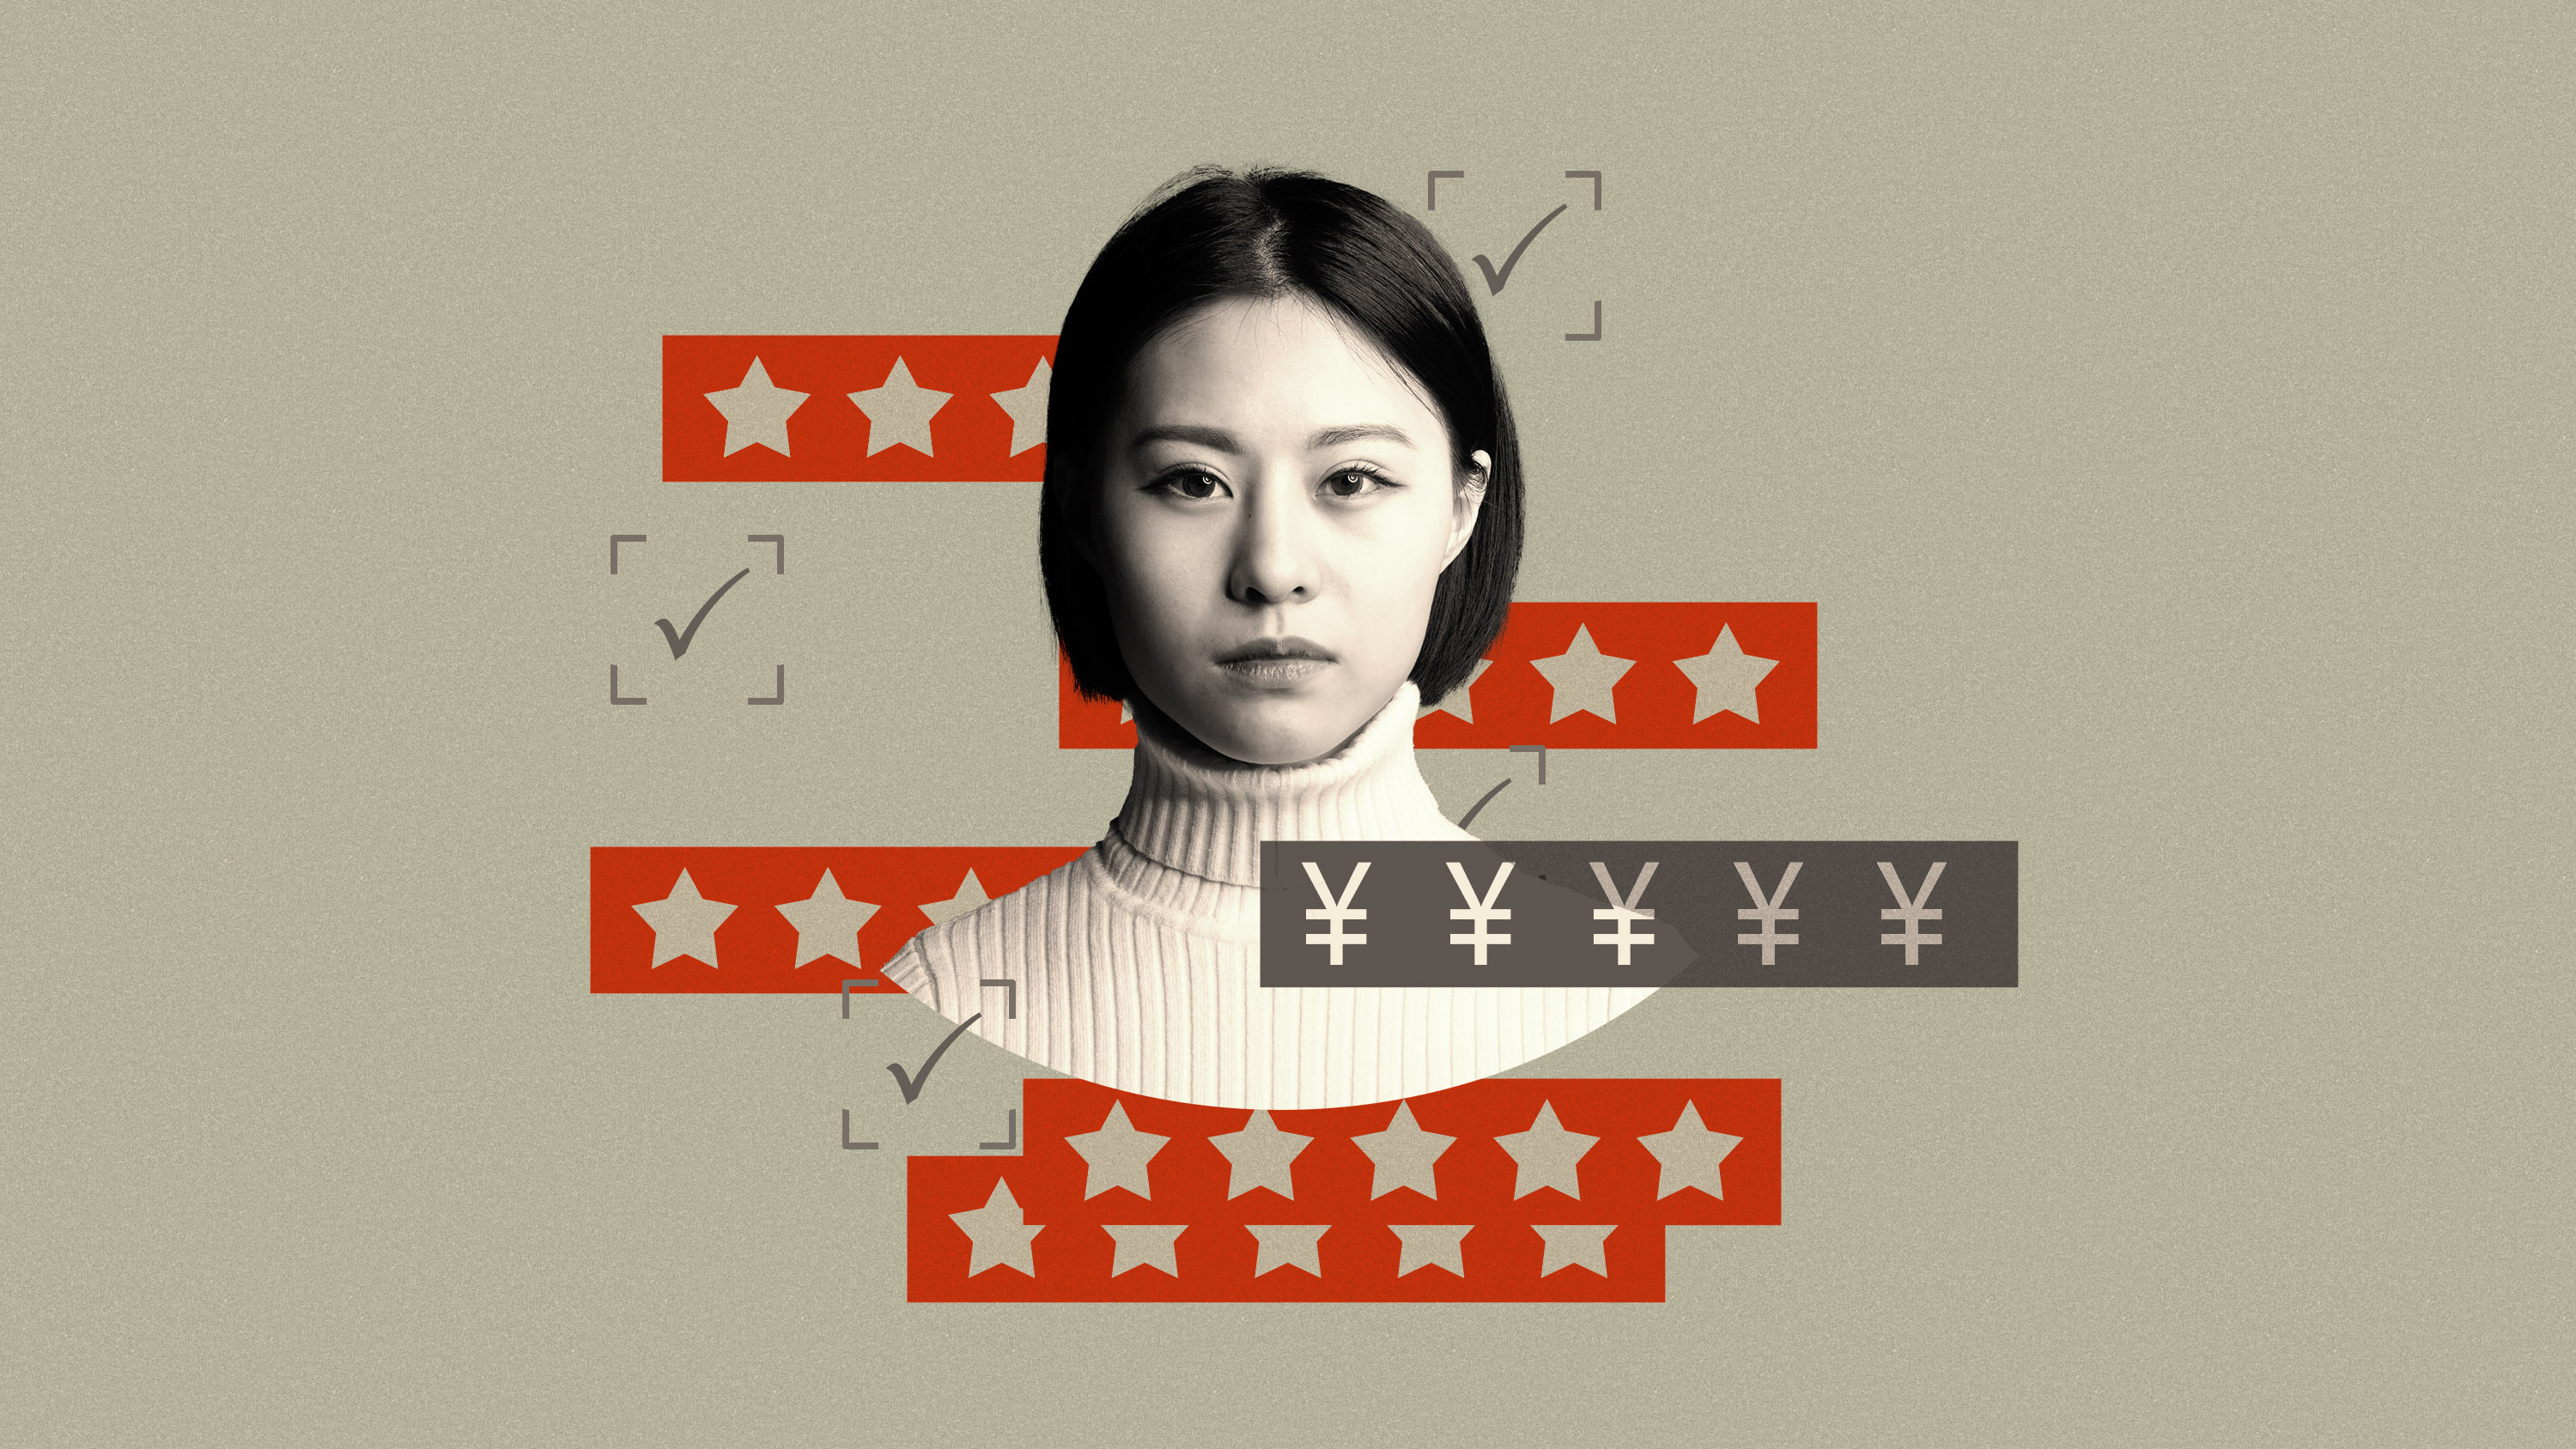  A woman's face surrounded by symbols of credit ratings.